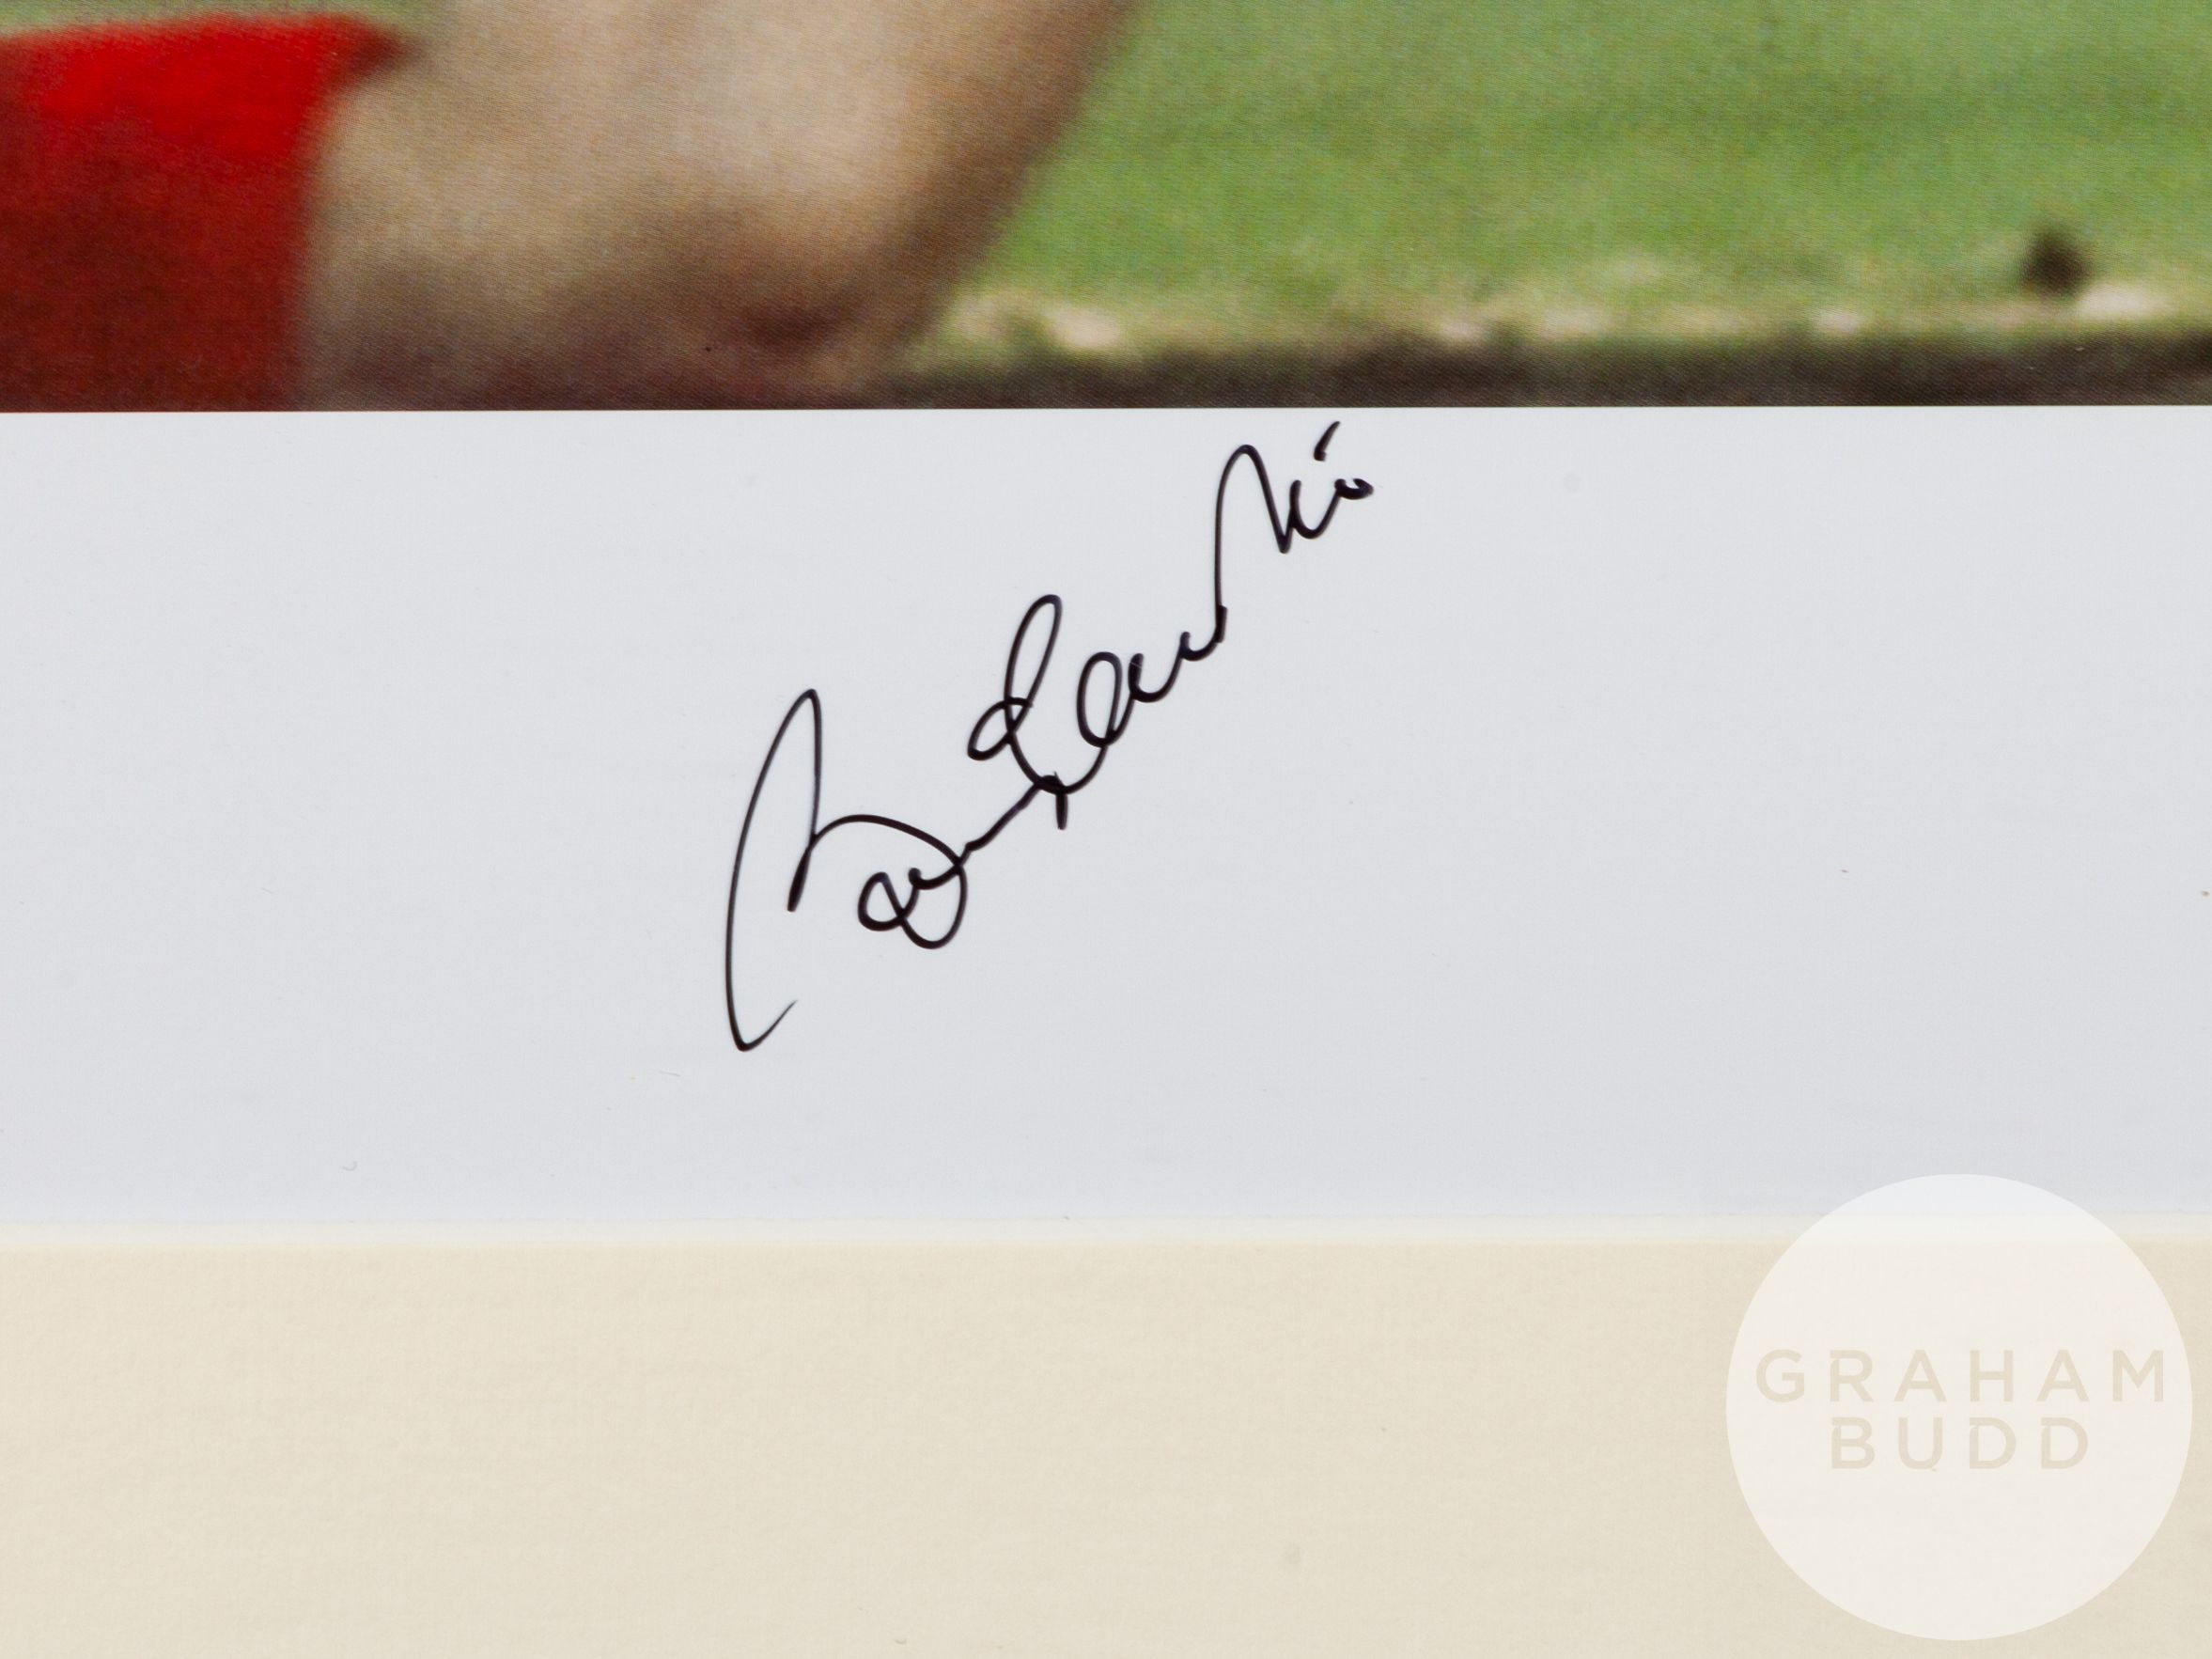 A large colour photographic print of Sir Bobby Charlton playing for Manchester United - Image 2 of 2